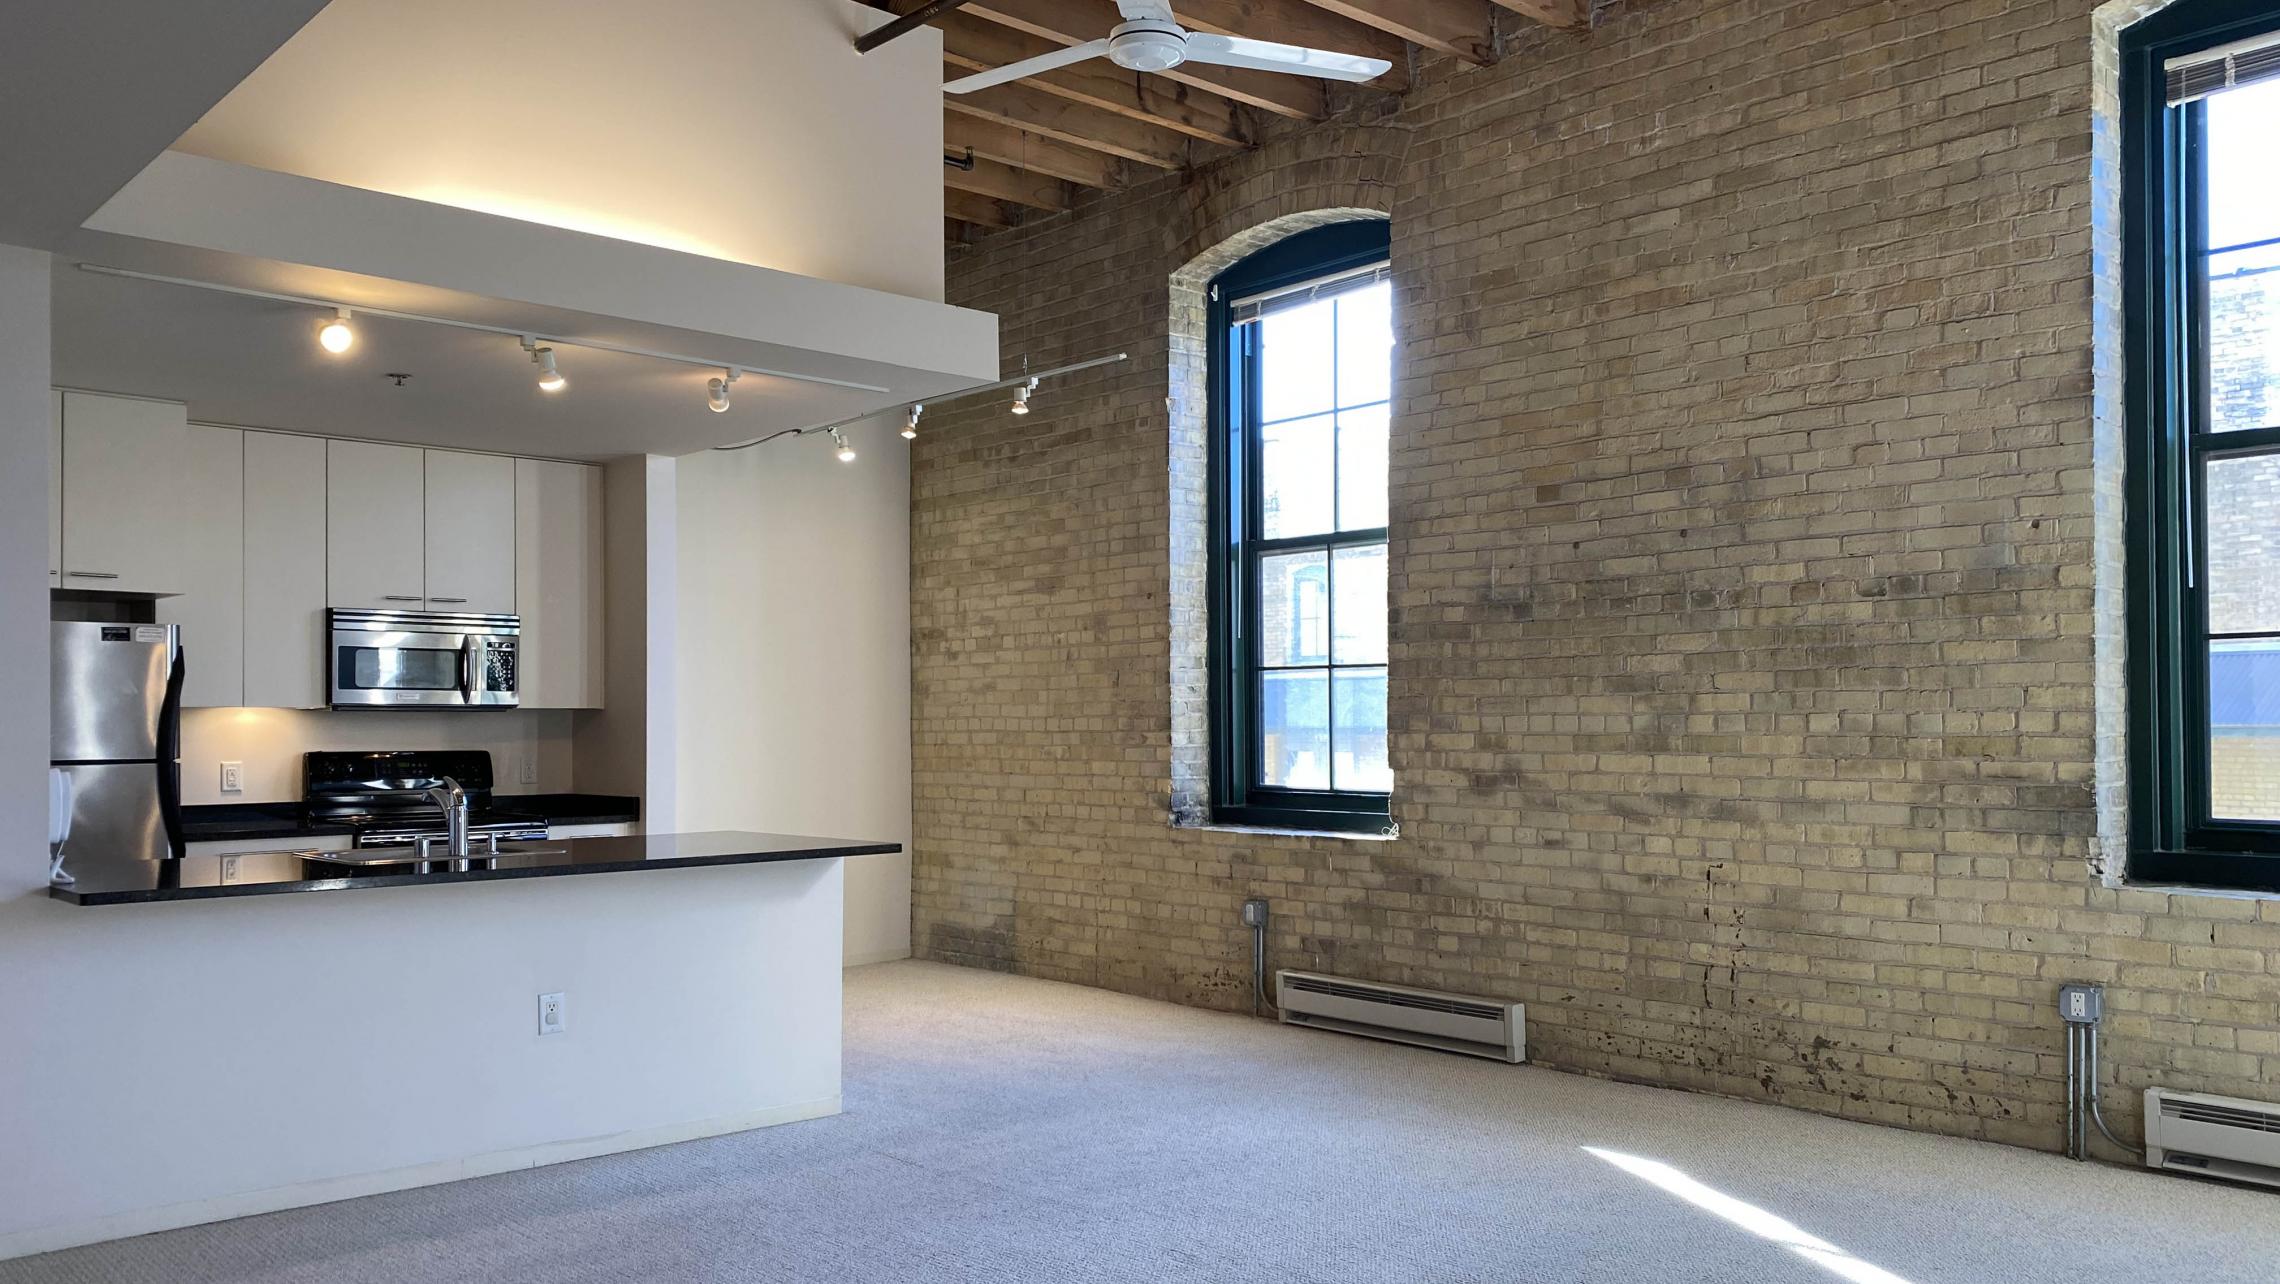 Tobacco-Lofts-at-The-Yards-Apartment-E212-Two-Bedroom-Balcony-Historic-Exposed-Brick-Timber-Beams-Unique-Design-Cats-High-Ceiling-Balcony-Downtown-Madison-Fitness-Lounge-Courtyard-Top-Floor-Vaulted-Ceiling